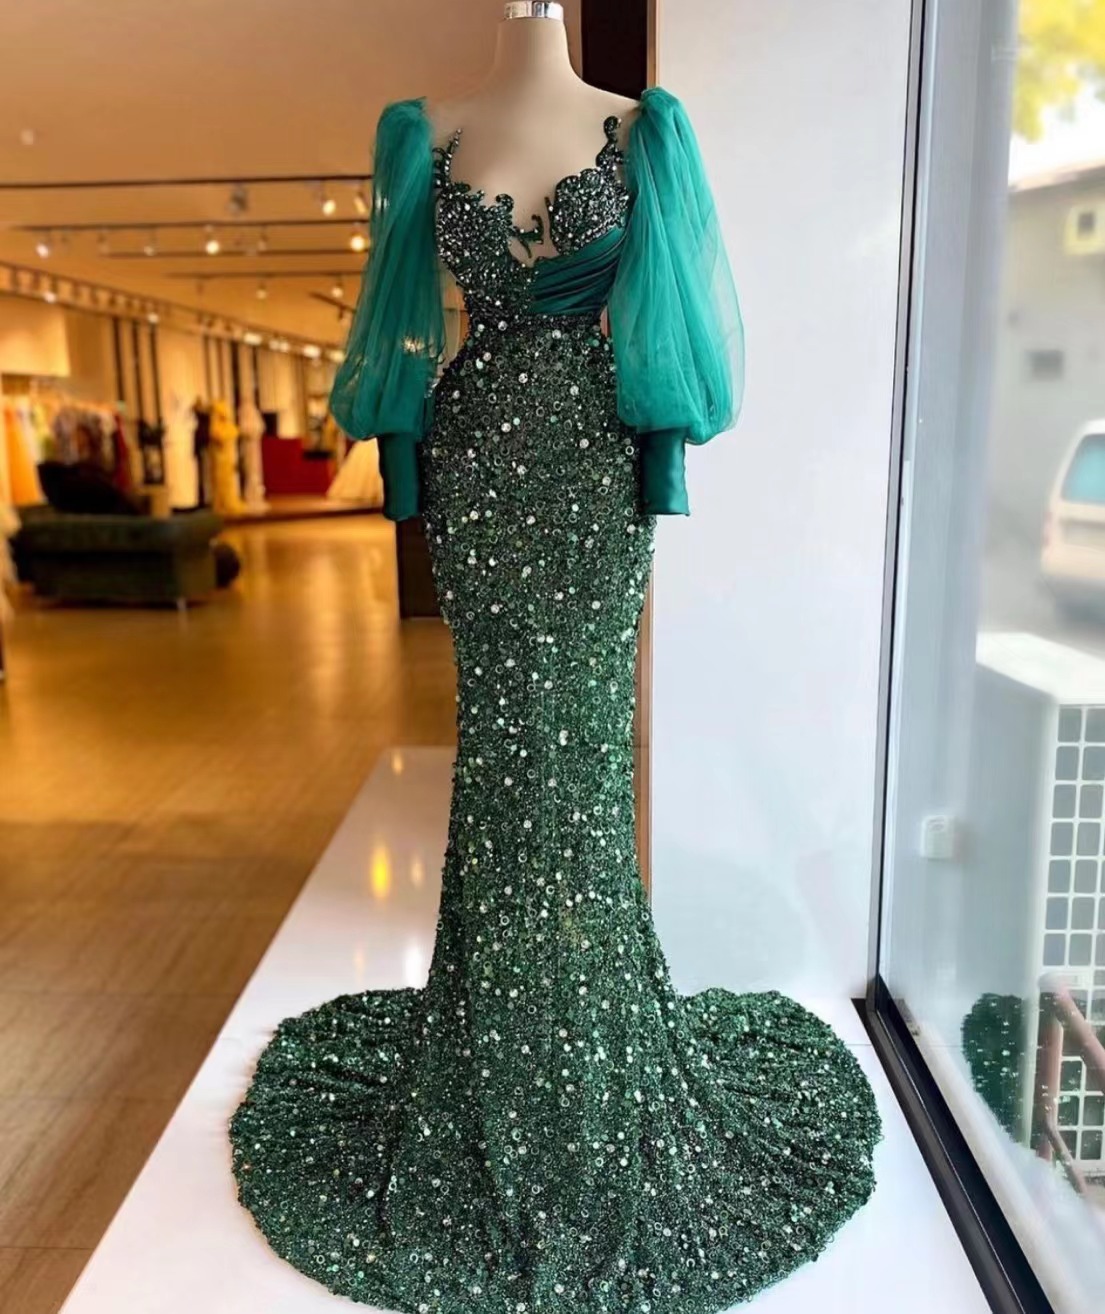 Hunter Green Evening Dresses Long Sleeve Modest Elegant Sparkly Mermaid Luxury Formal Party Dresses Women Evening Gown